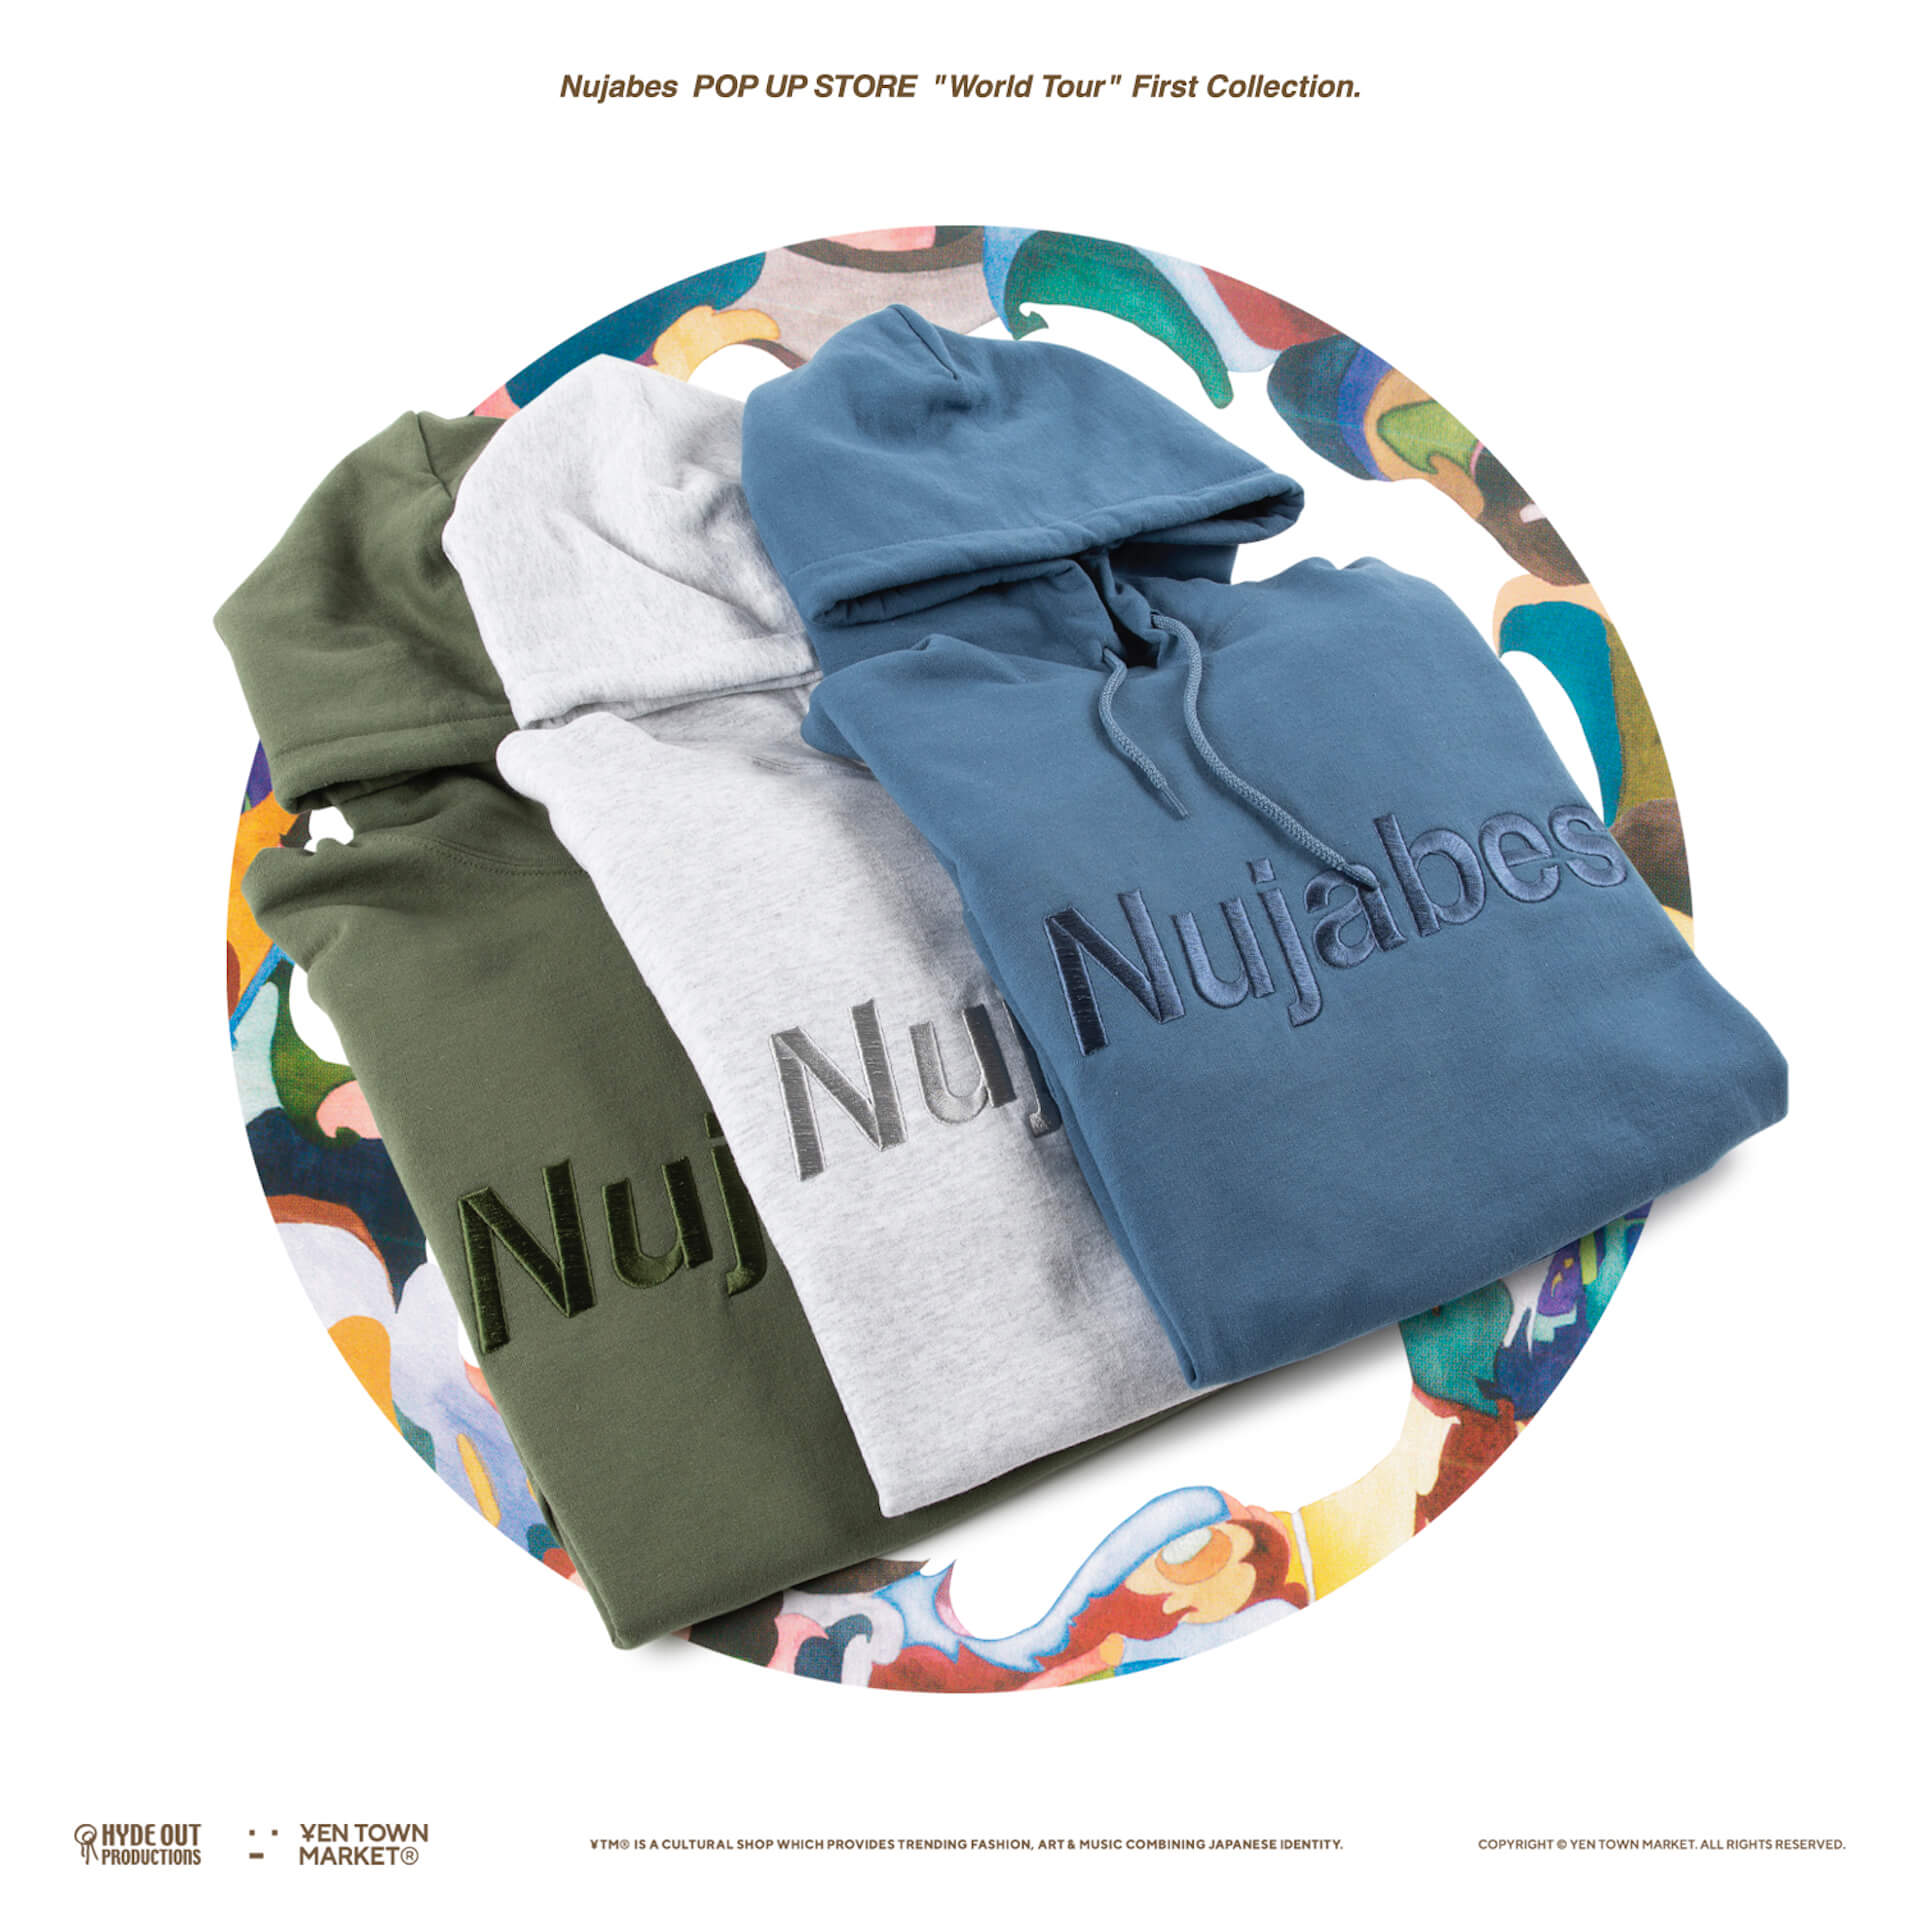 Nujabesのオフィシャルポップアップ＜Nujabes Official Pop Up First Collection＞もクライマックスに突入！最新作「Drop 5」の受注が本日より開始 life210521_nujabes-210521_3